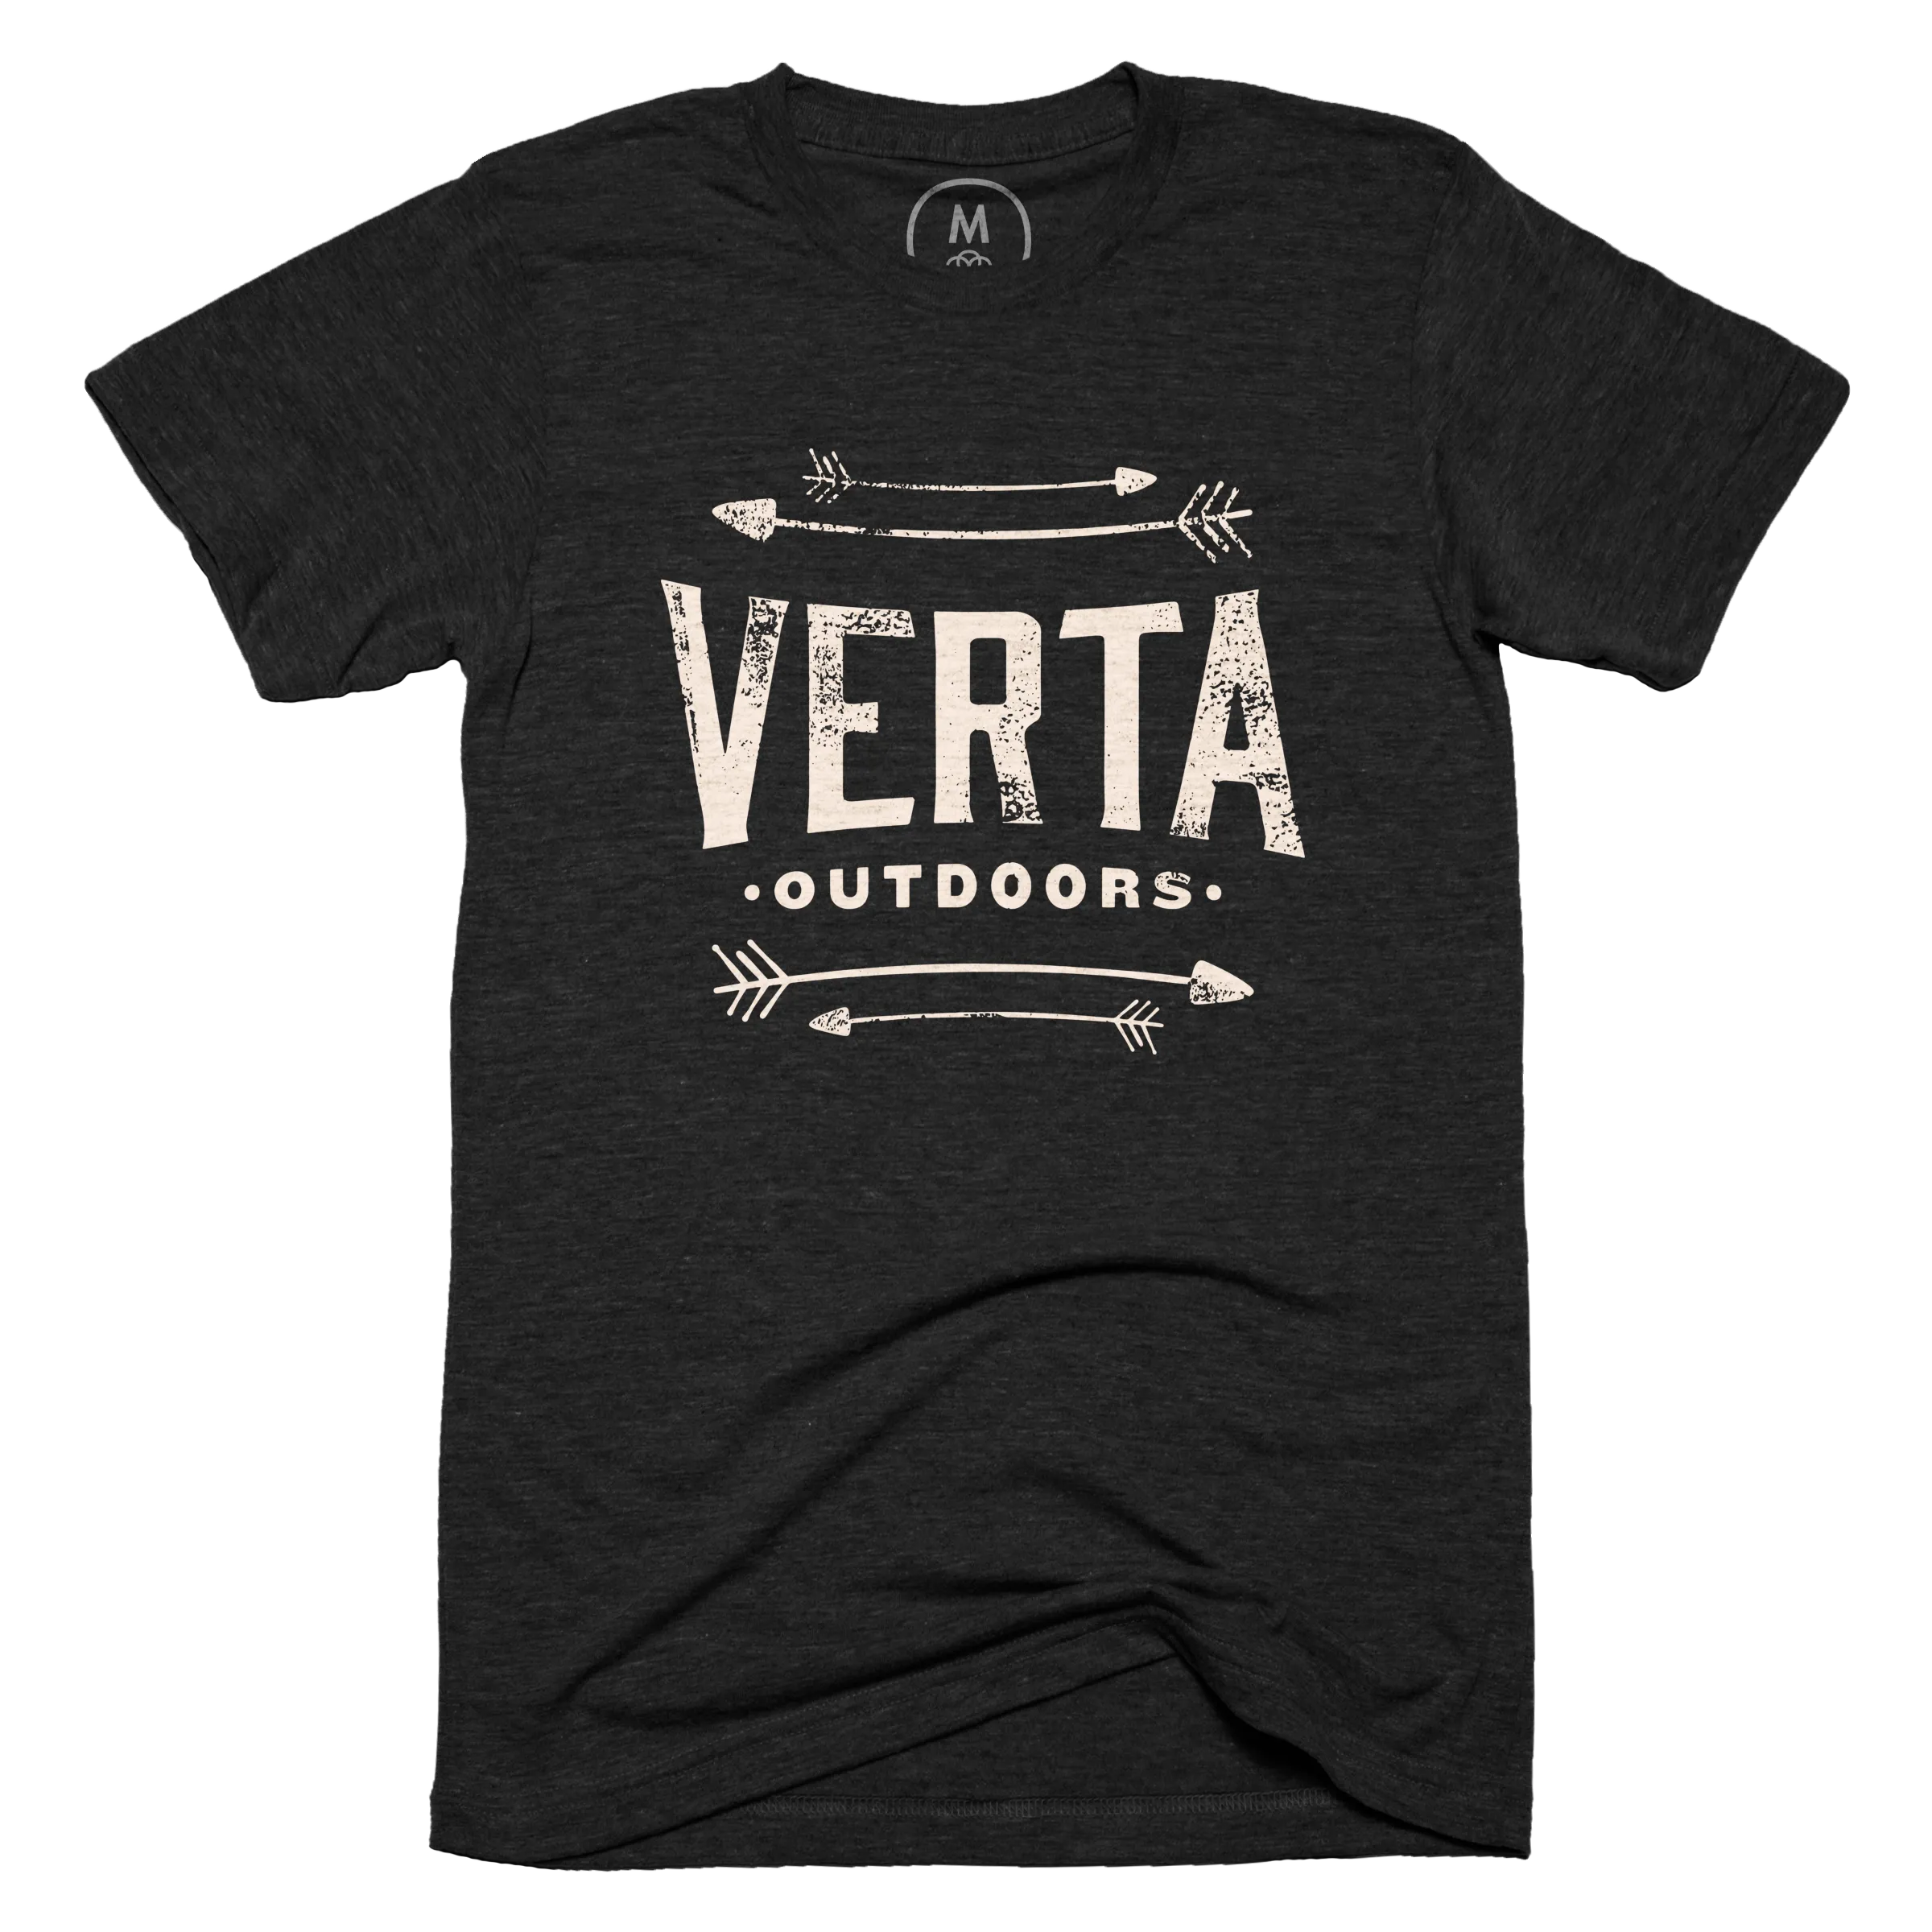 Verta Outdoors” graphic tee, pullover crewneck, pullover hoodie